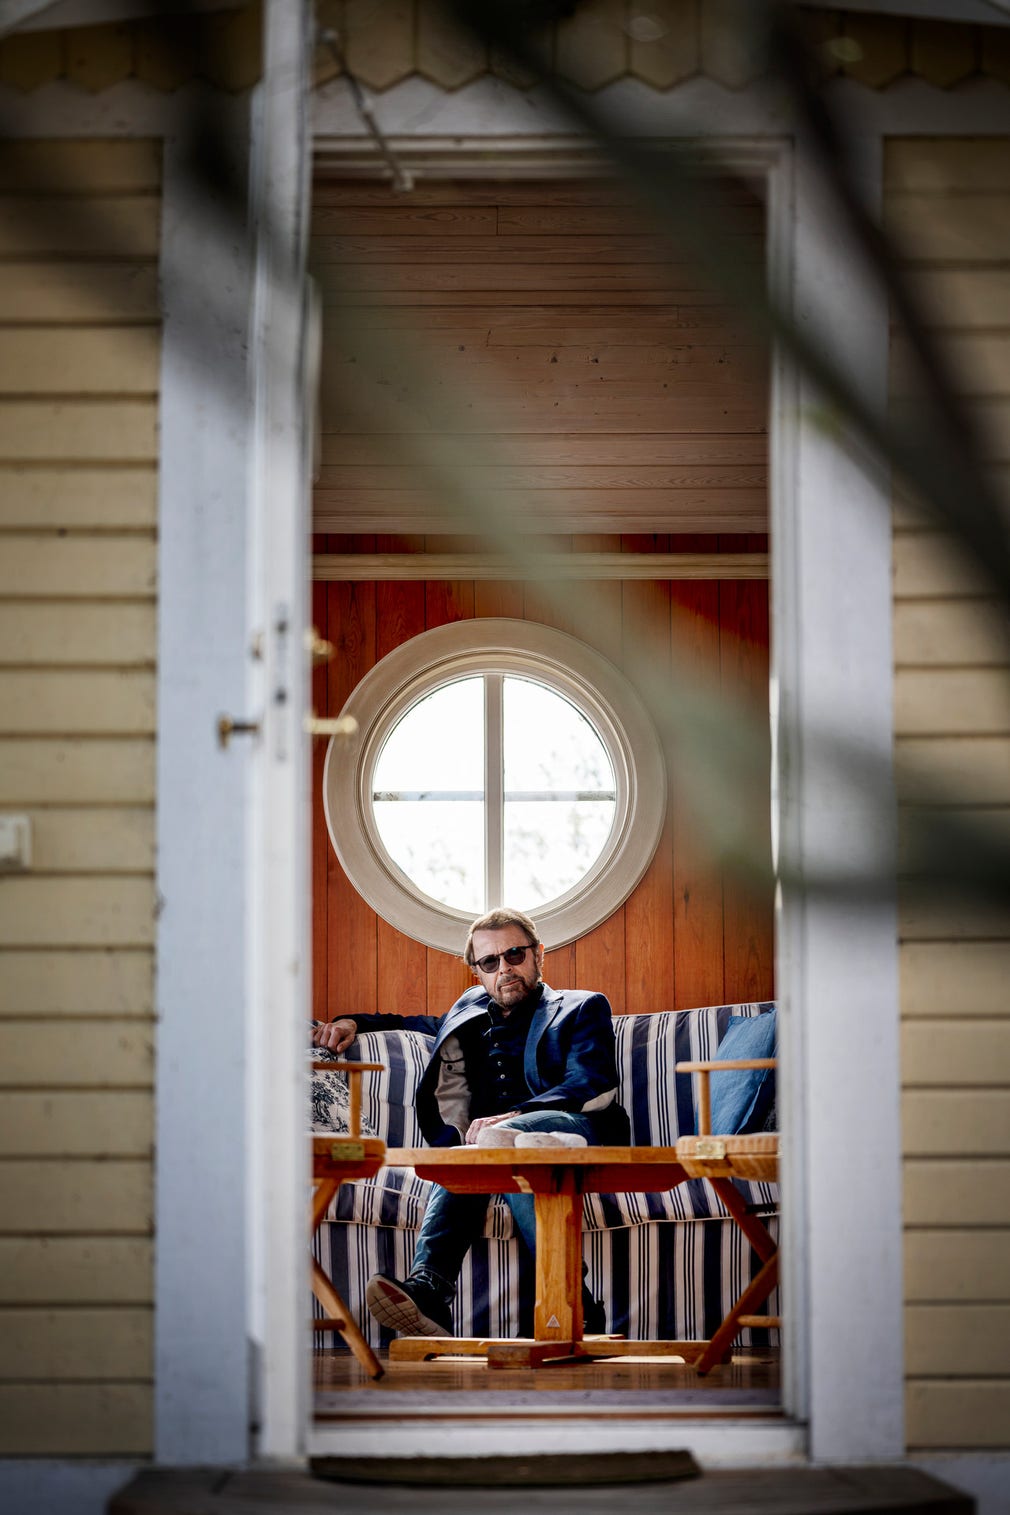 In a cottage on the island Björn Ulvaeus meets a therapist every Wednesday.